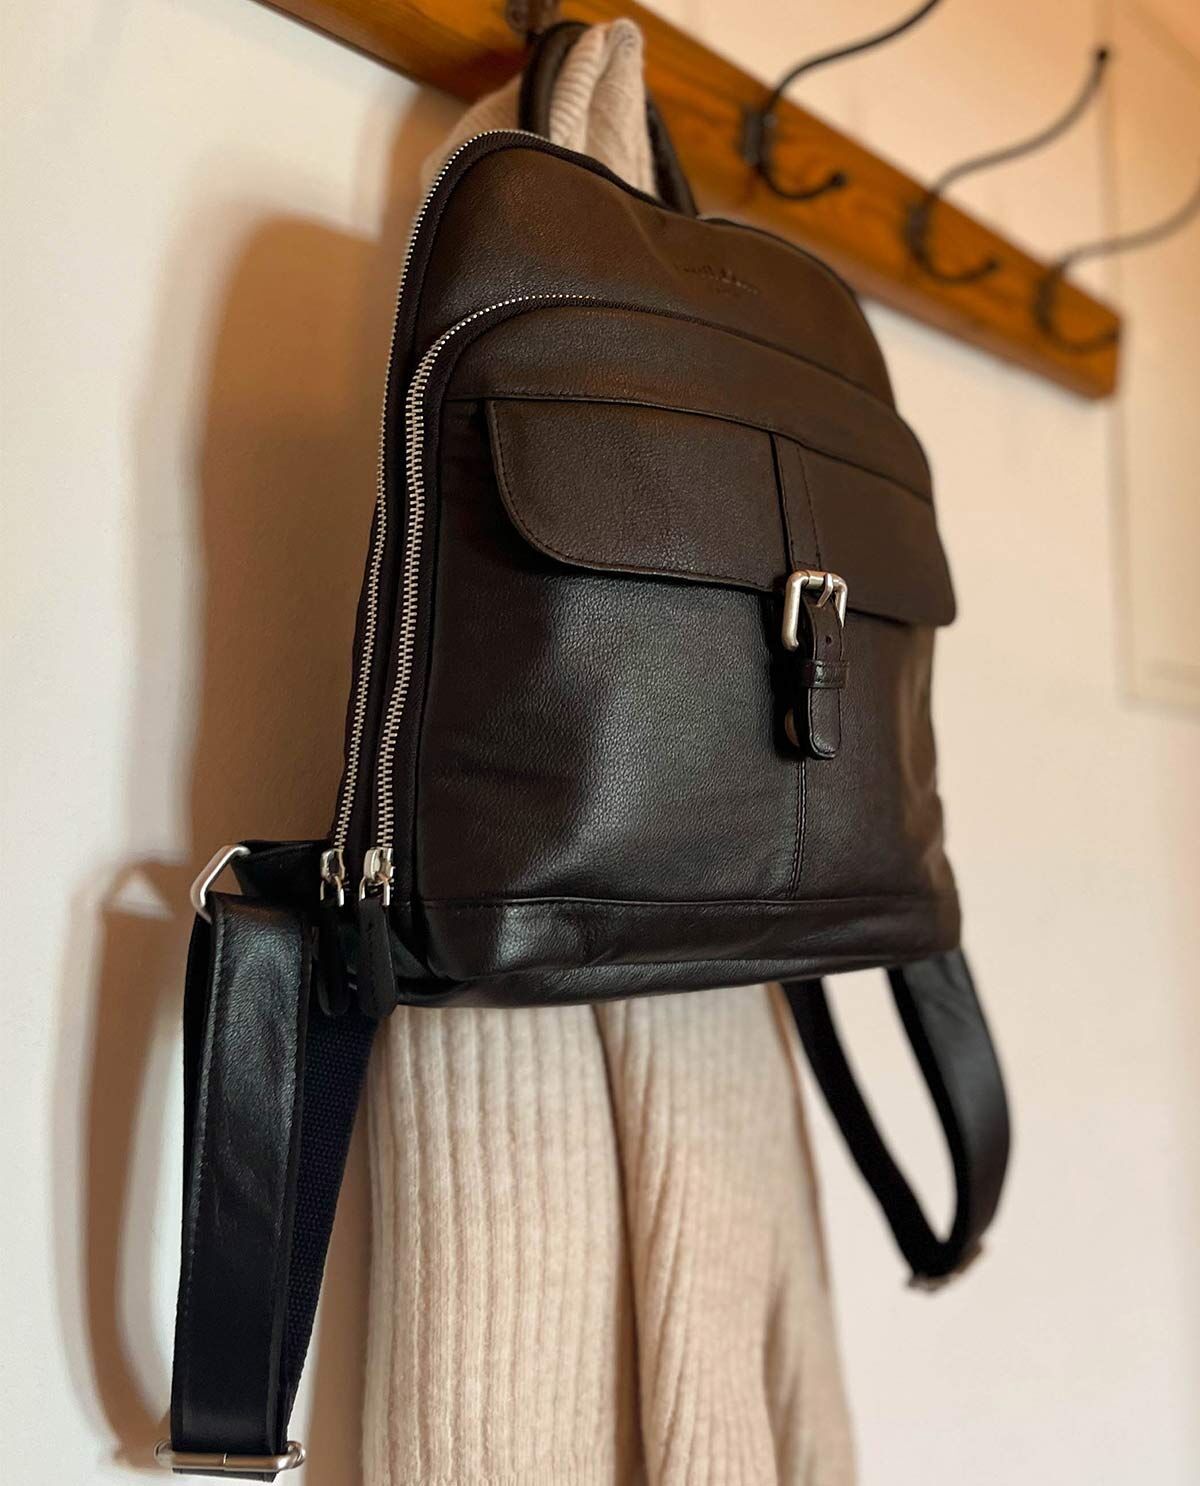 L.Credi, Bags, All Leather Backpack In Black In Good Condition